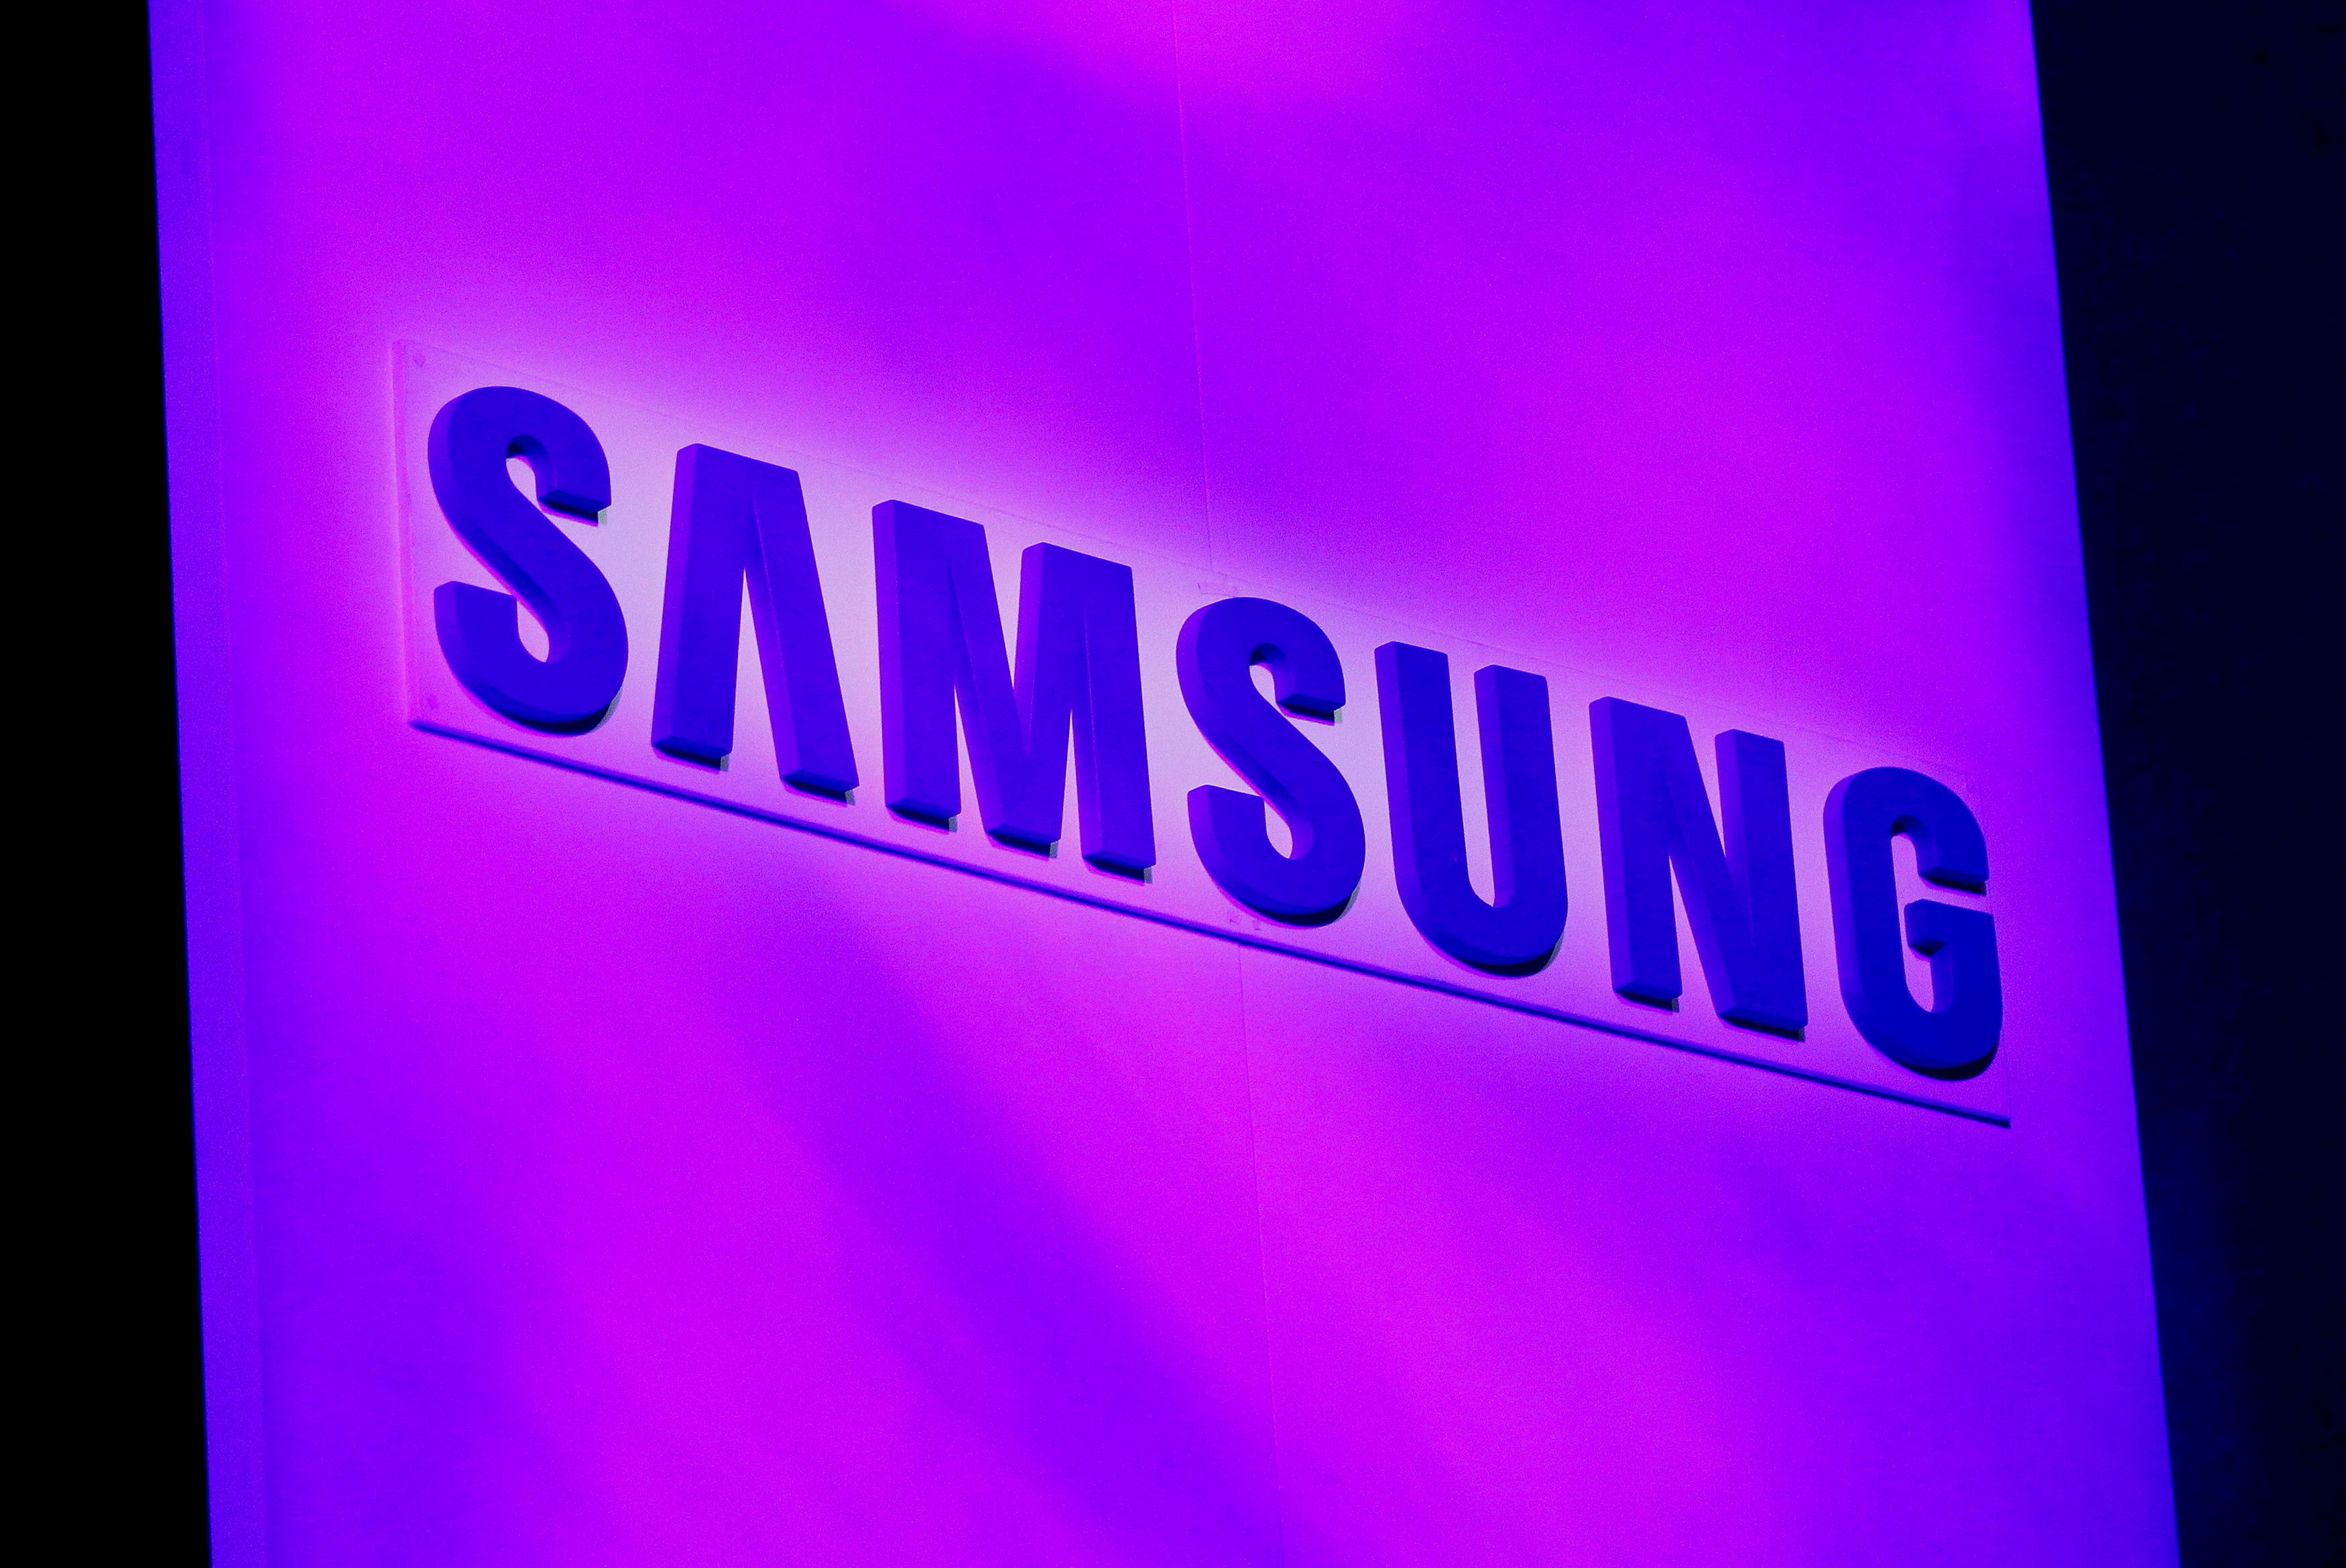 The company logo is displayed at the Samsung news conference at the Consumer Electronics Show (CES) in Las Vegas